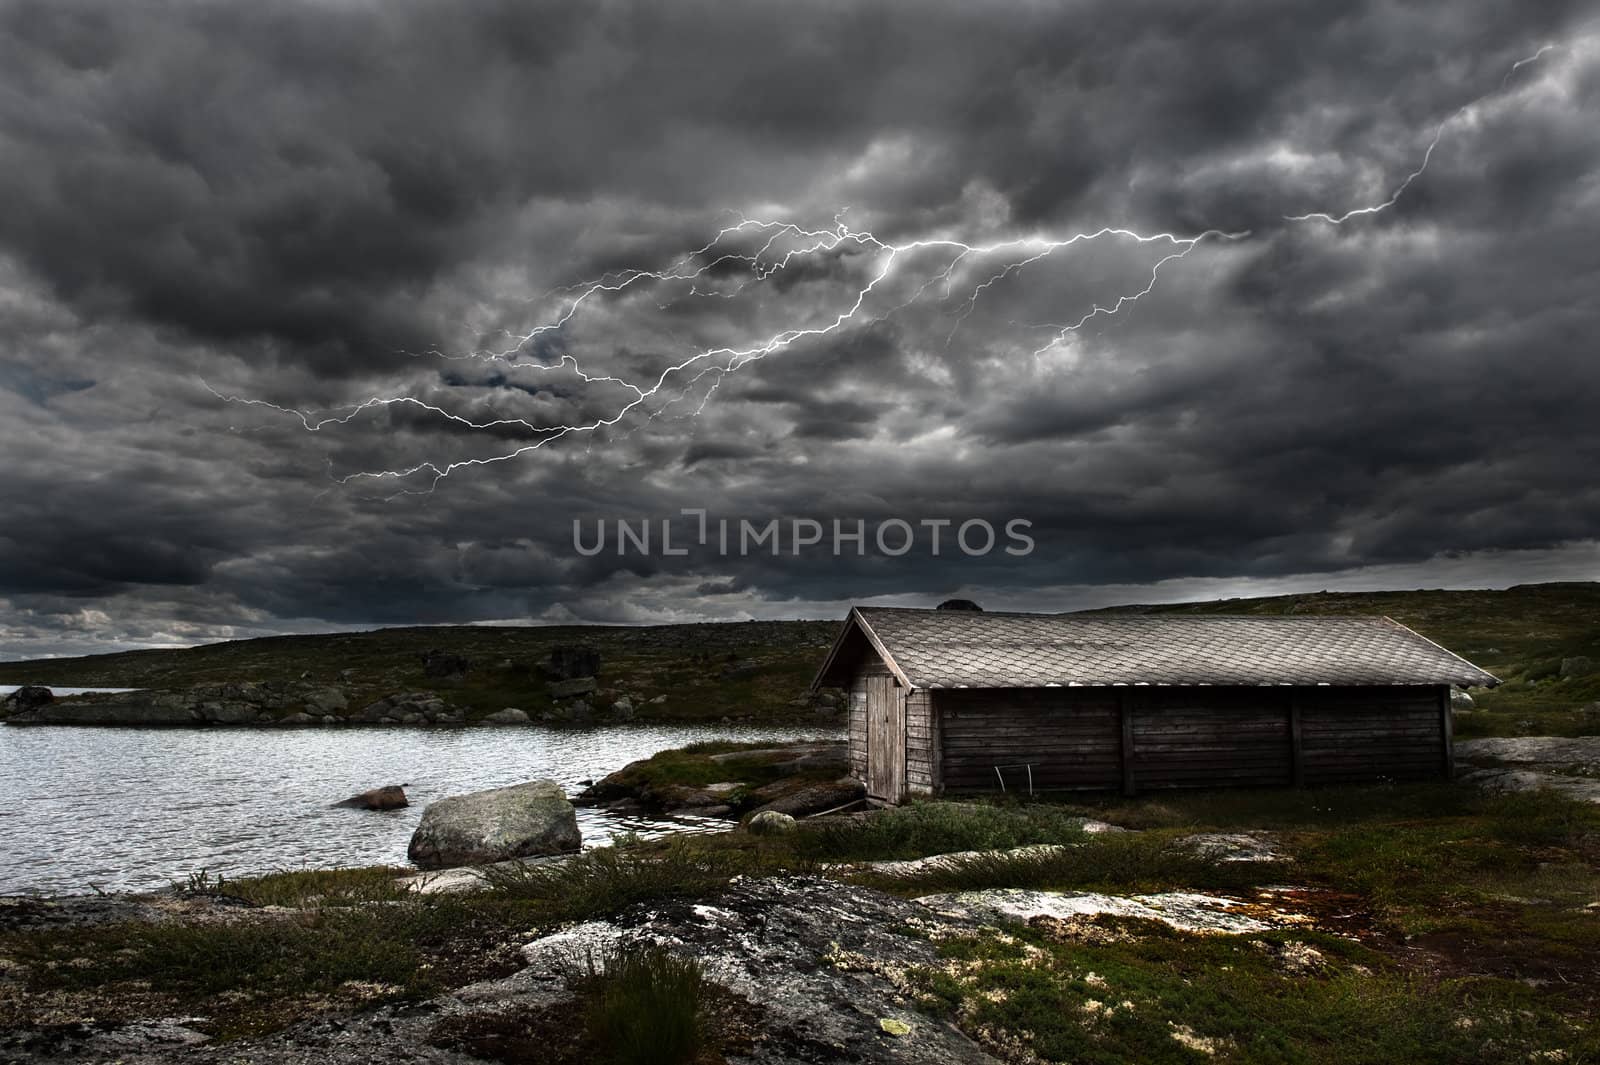 A lightning strikes over an old shed by a lake in the norwegian mountains